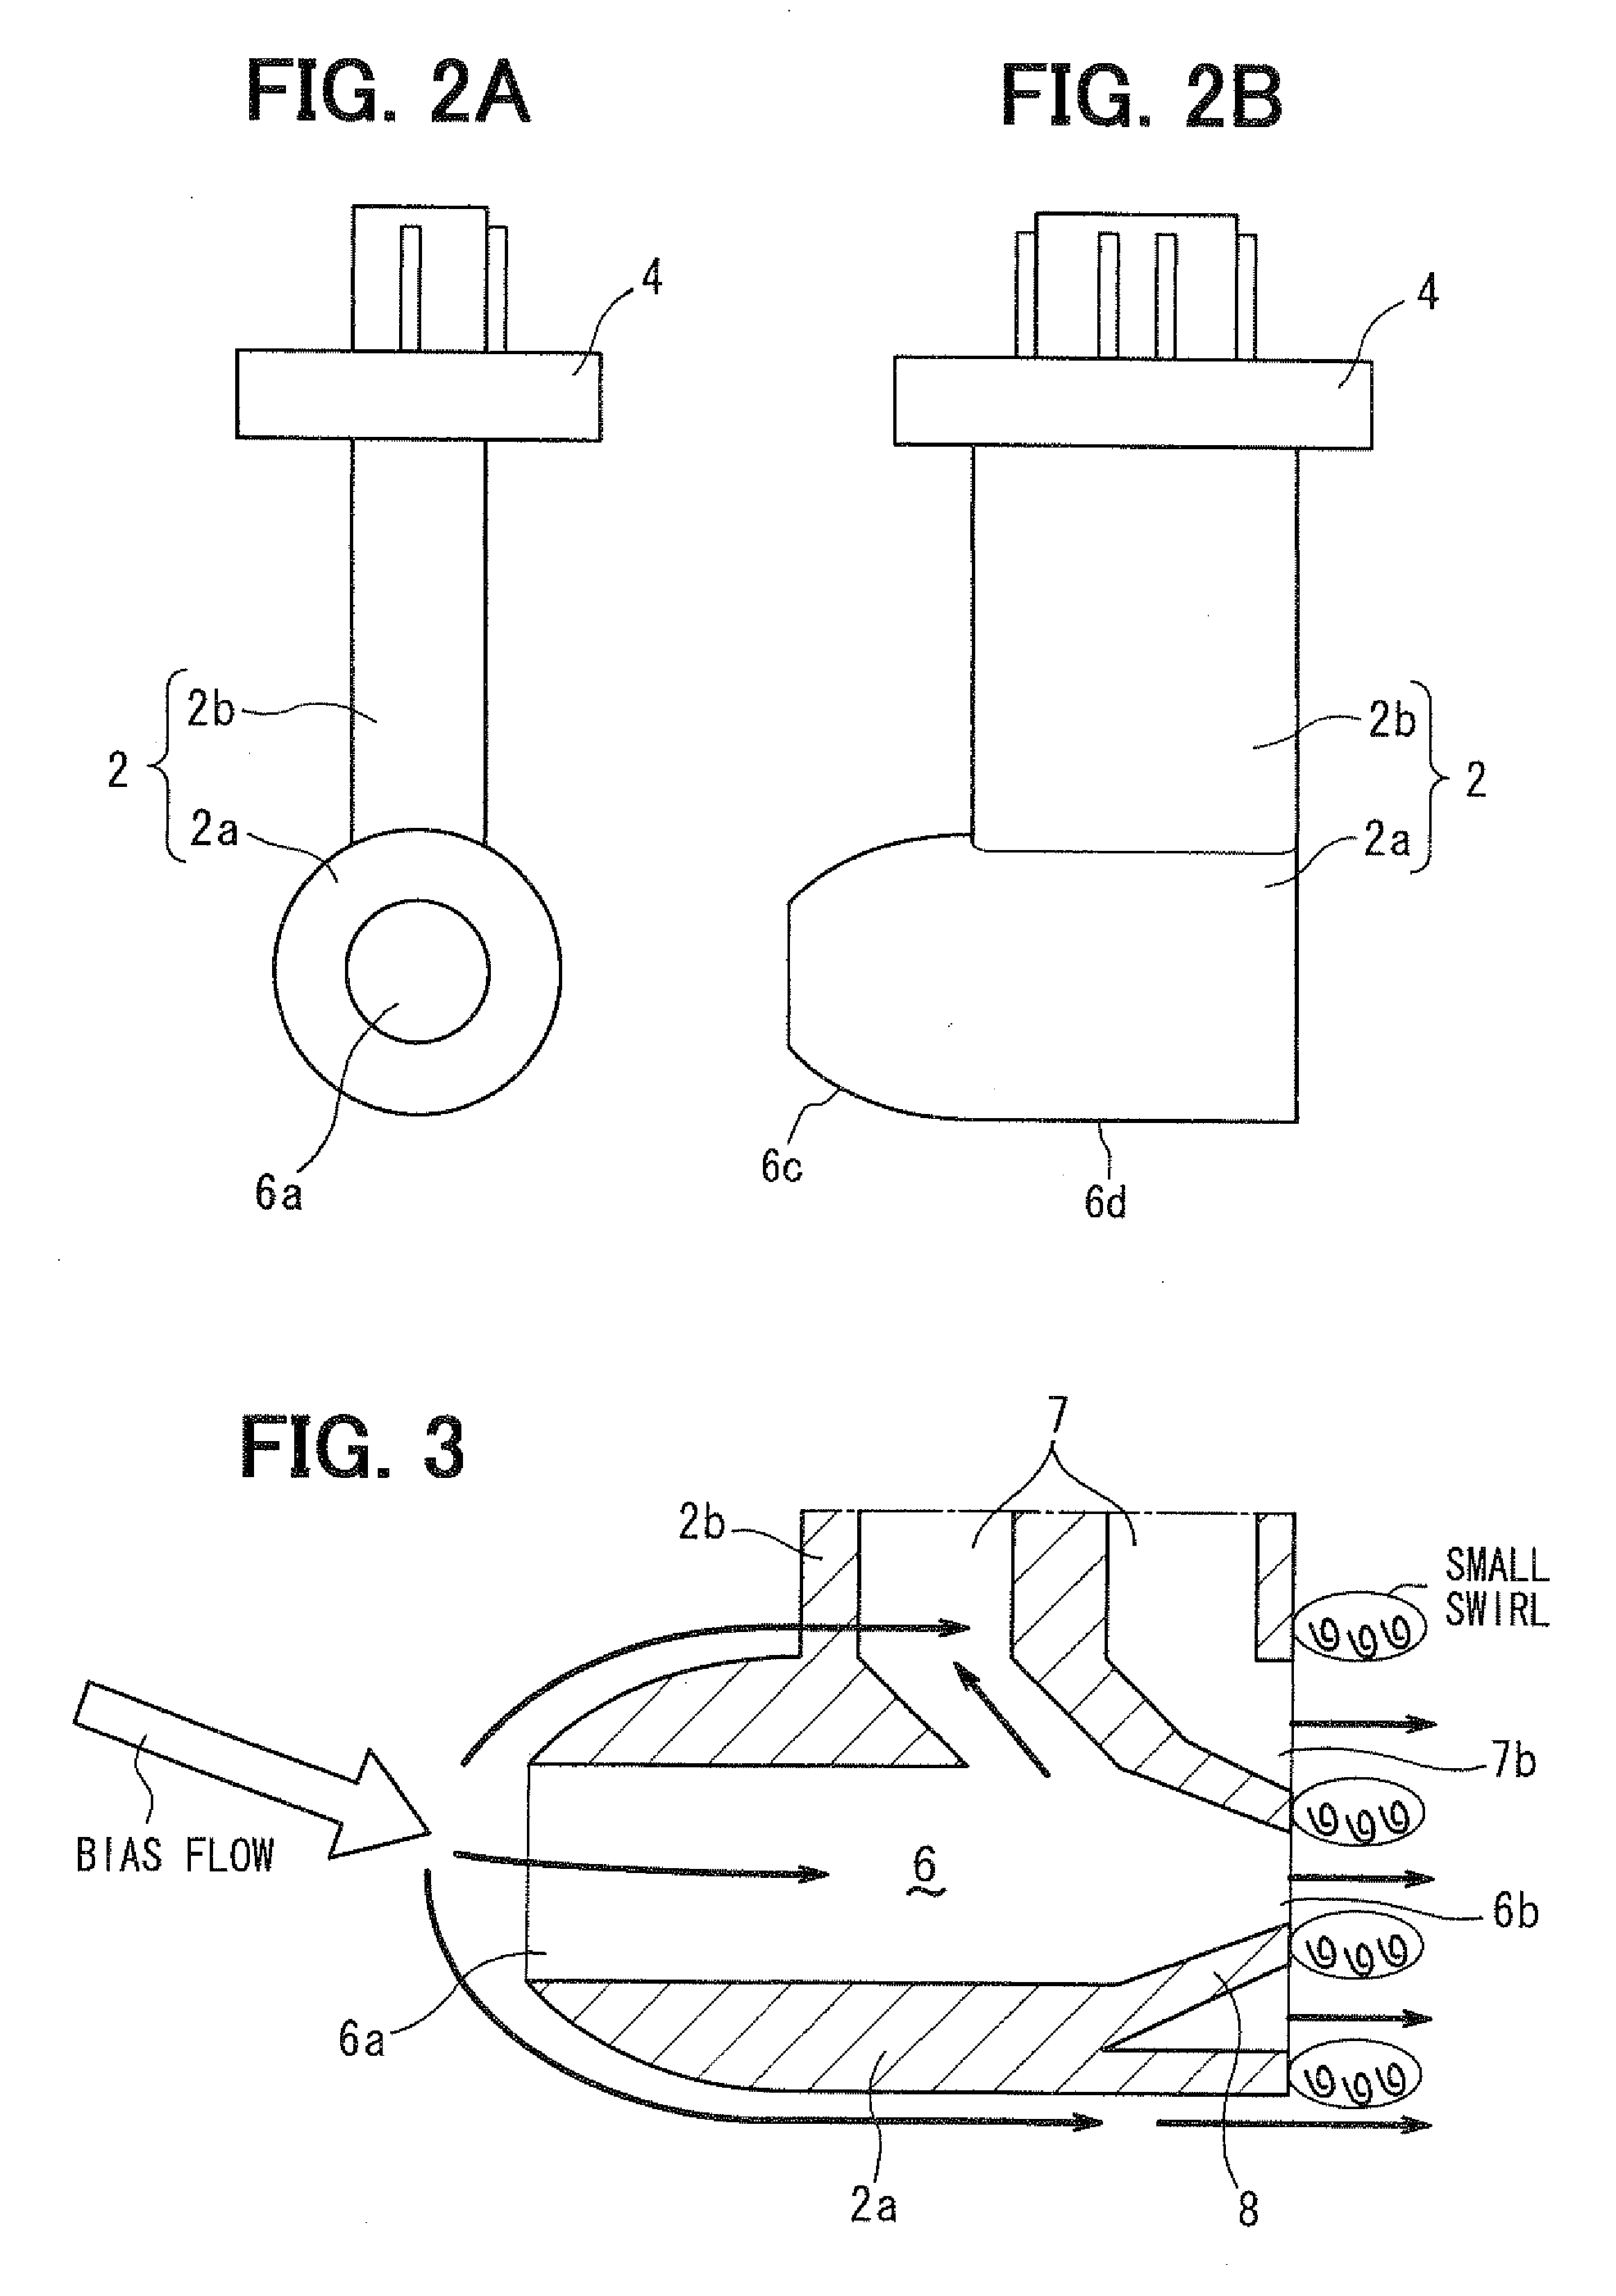 Air flow measuring device